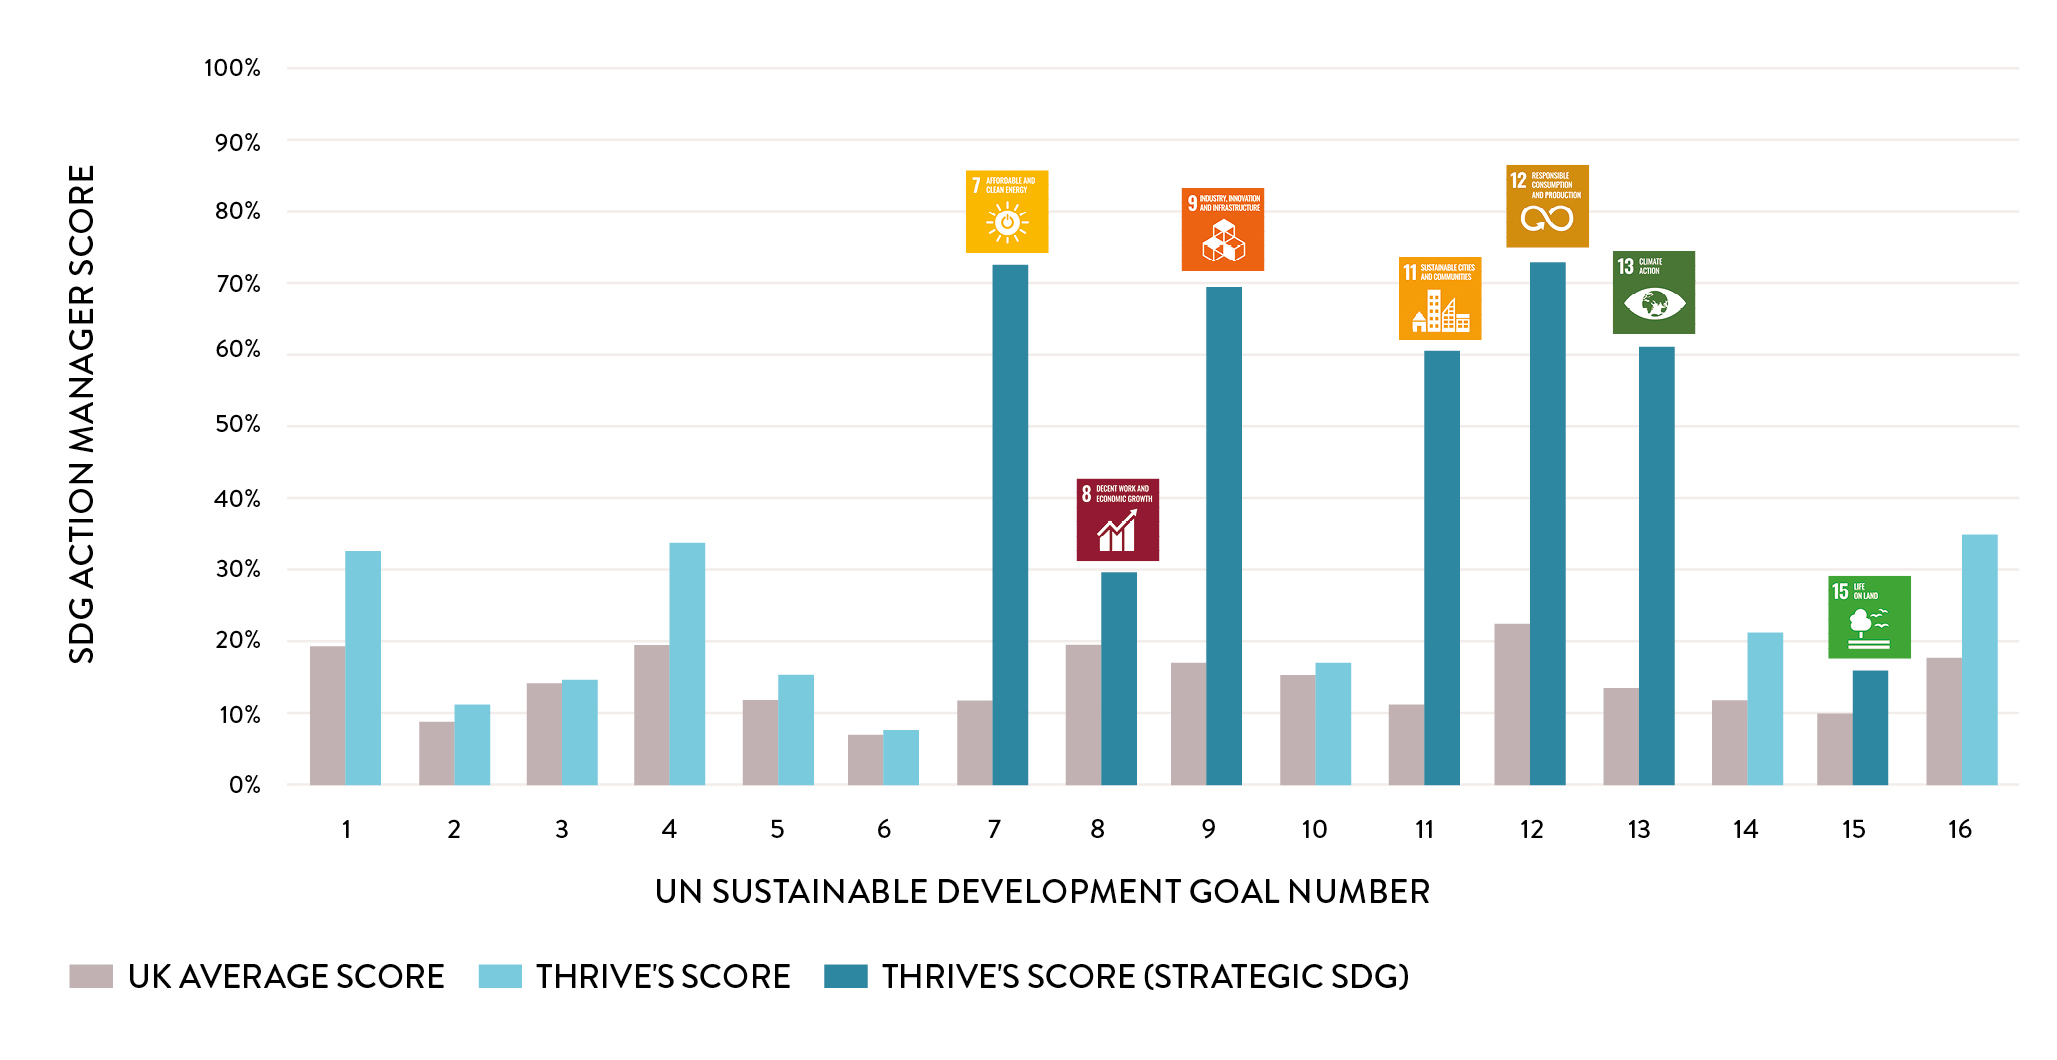 Bar chart showing Thrive Renewables score according to the SDG action manager score vs. the UK average score. Overall consistently scores above the UK average across all the UN sustainable goal numbers